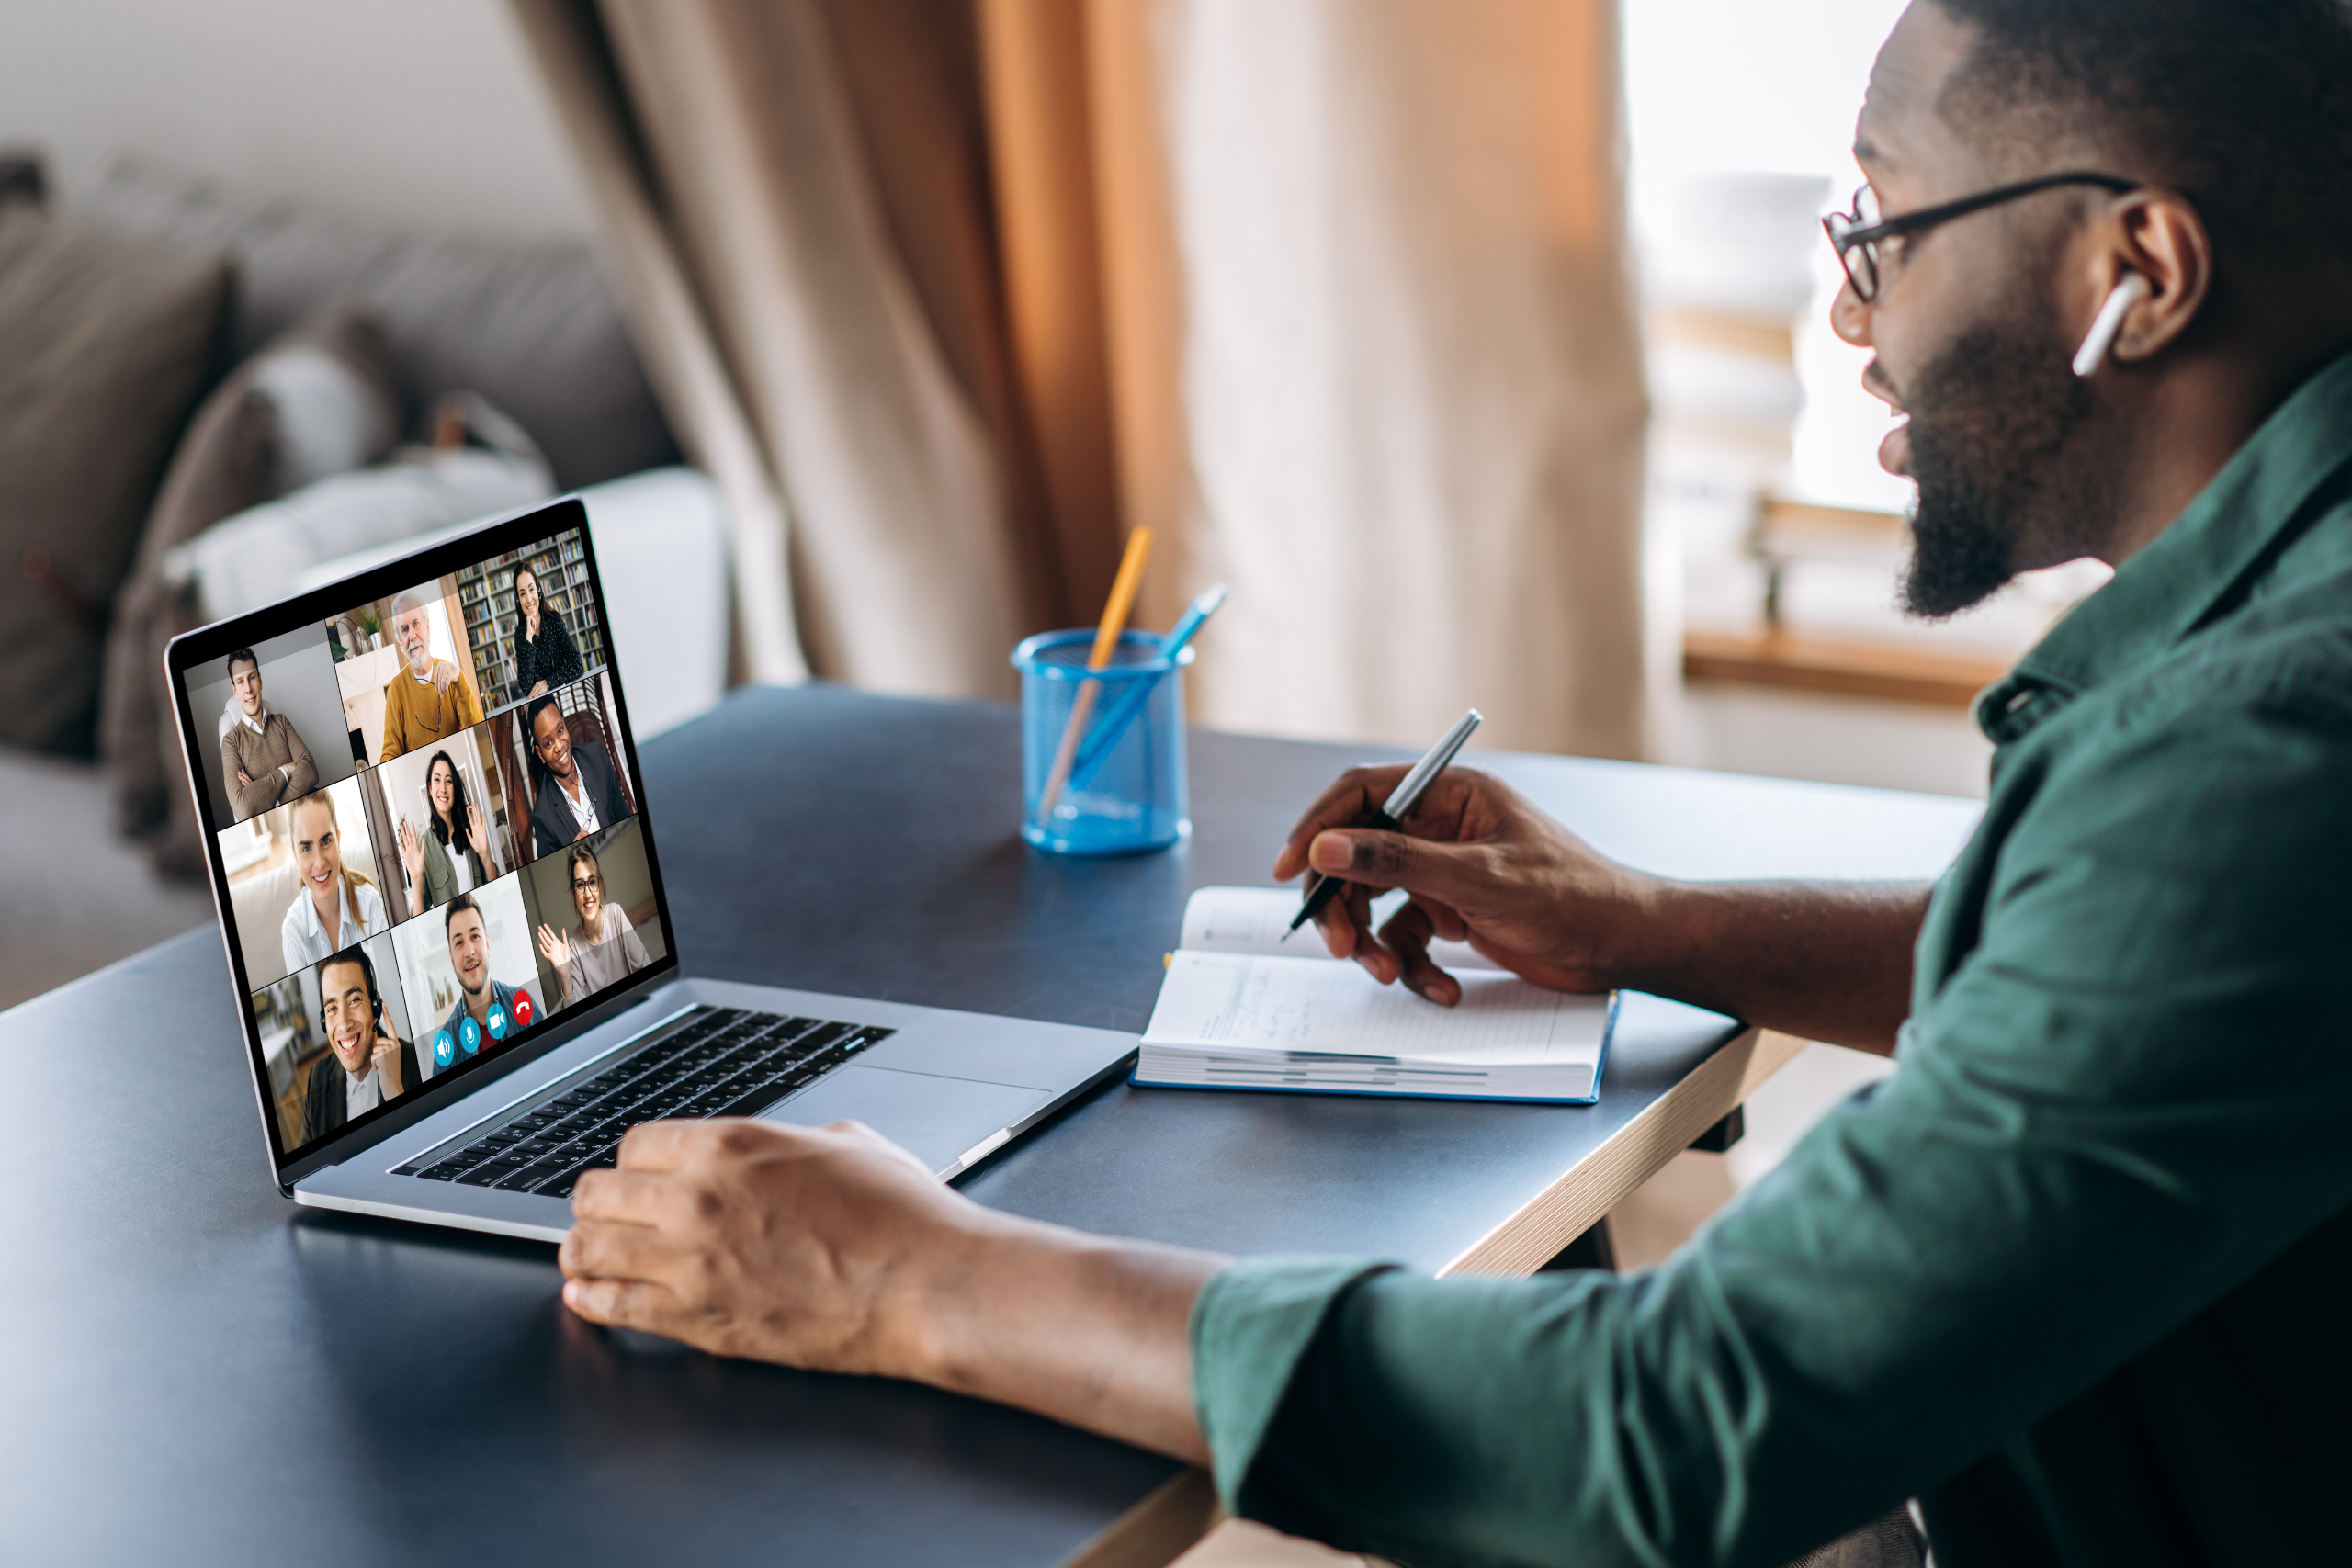 Run an Effective Community Meeting on Zoom with these Tips